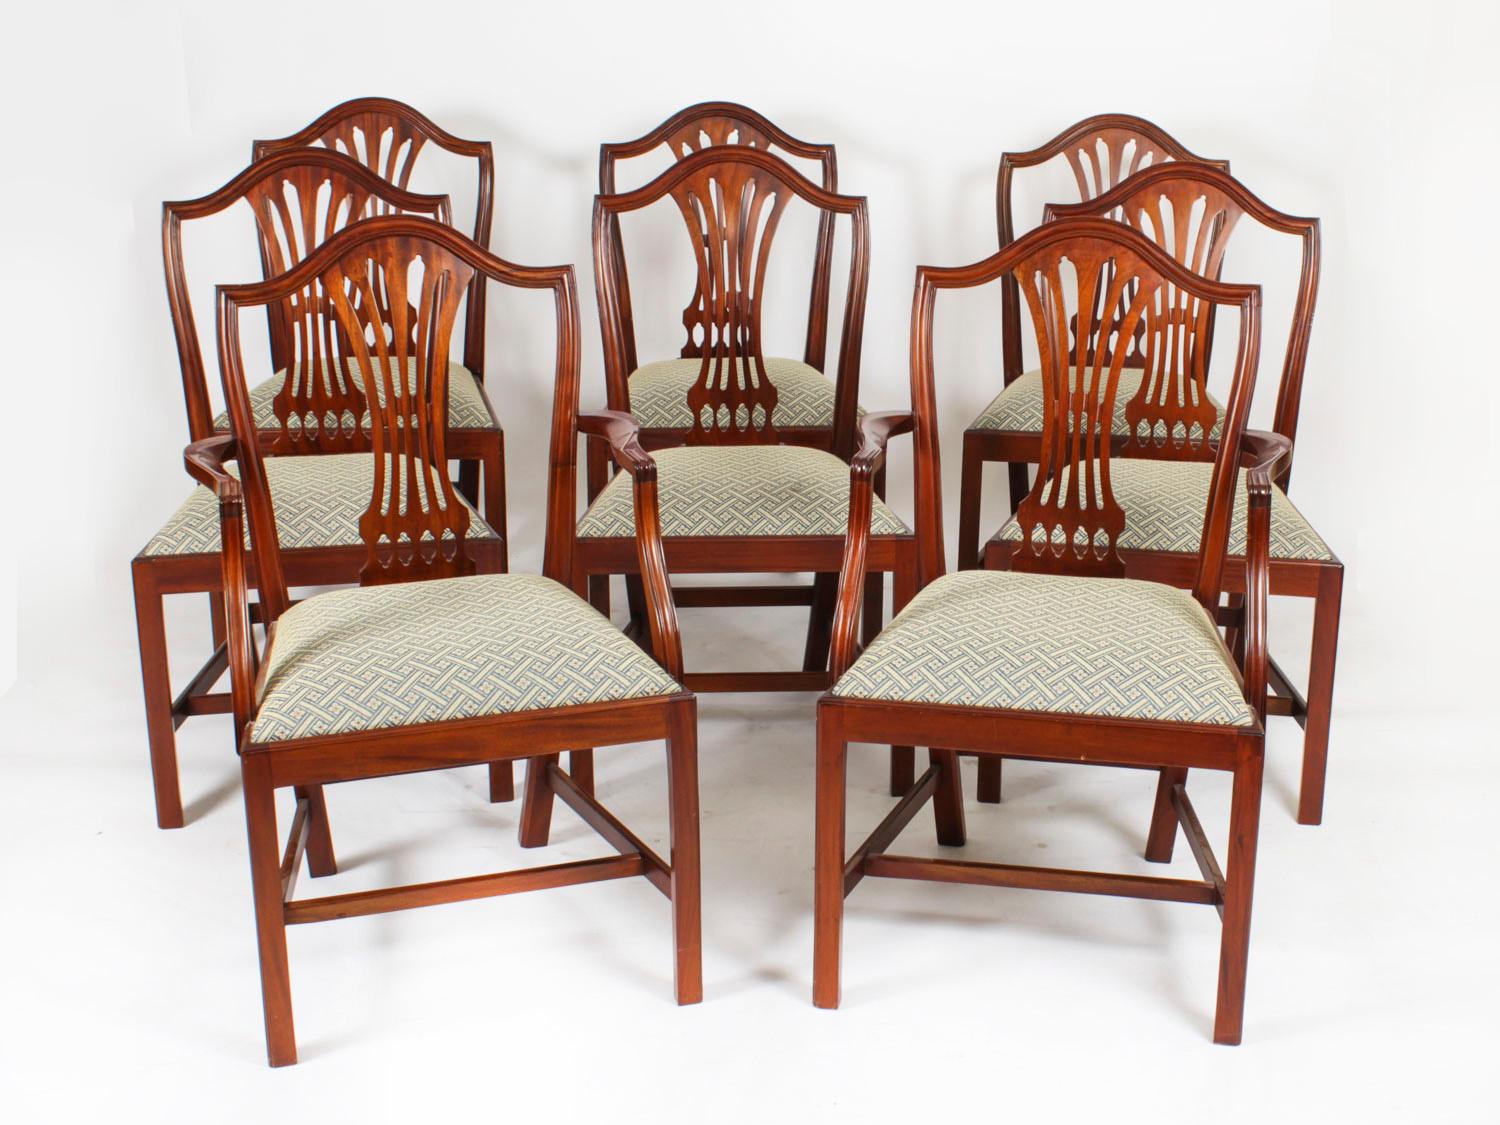 Vintage Regency Revival Dining Table and 8 Chairs by William Tillman 4